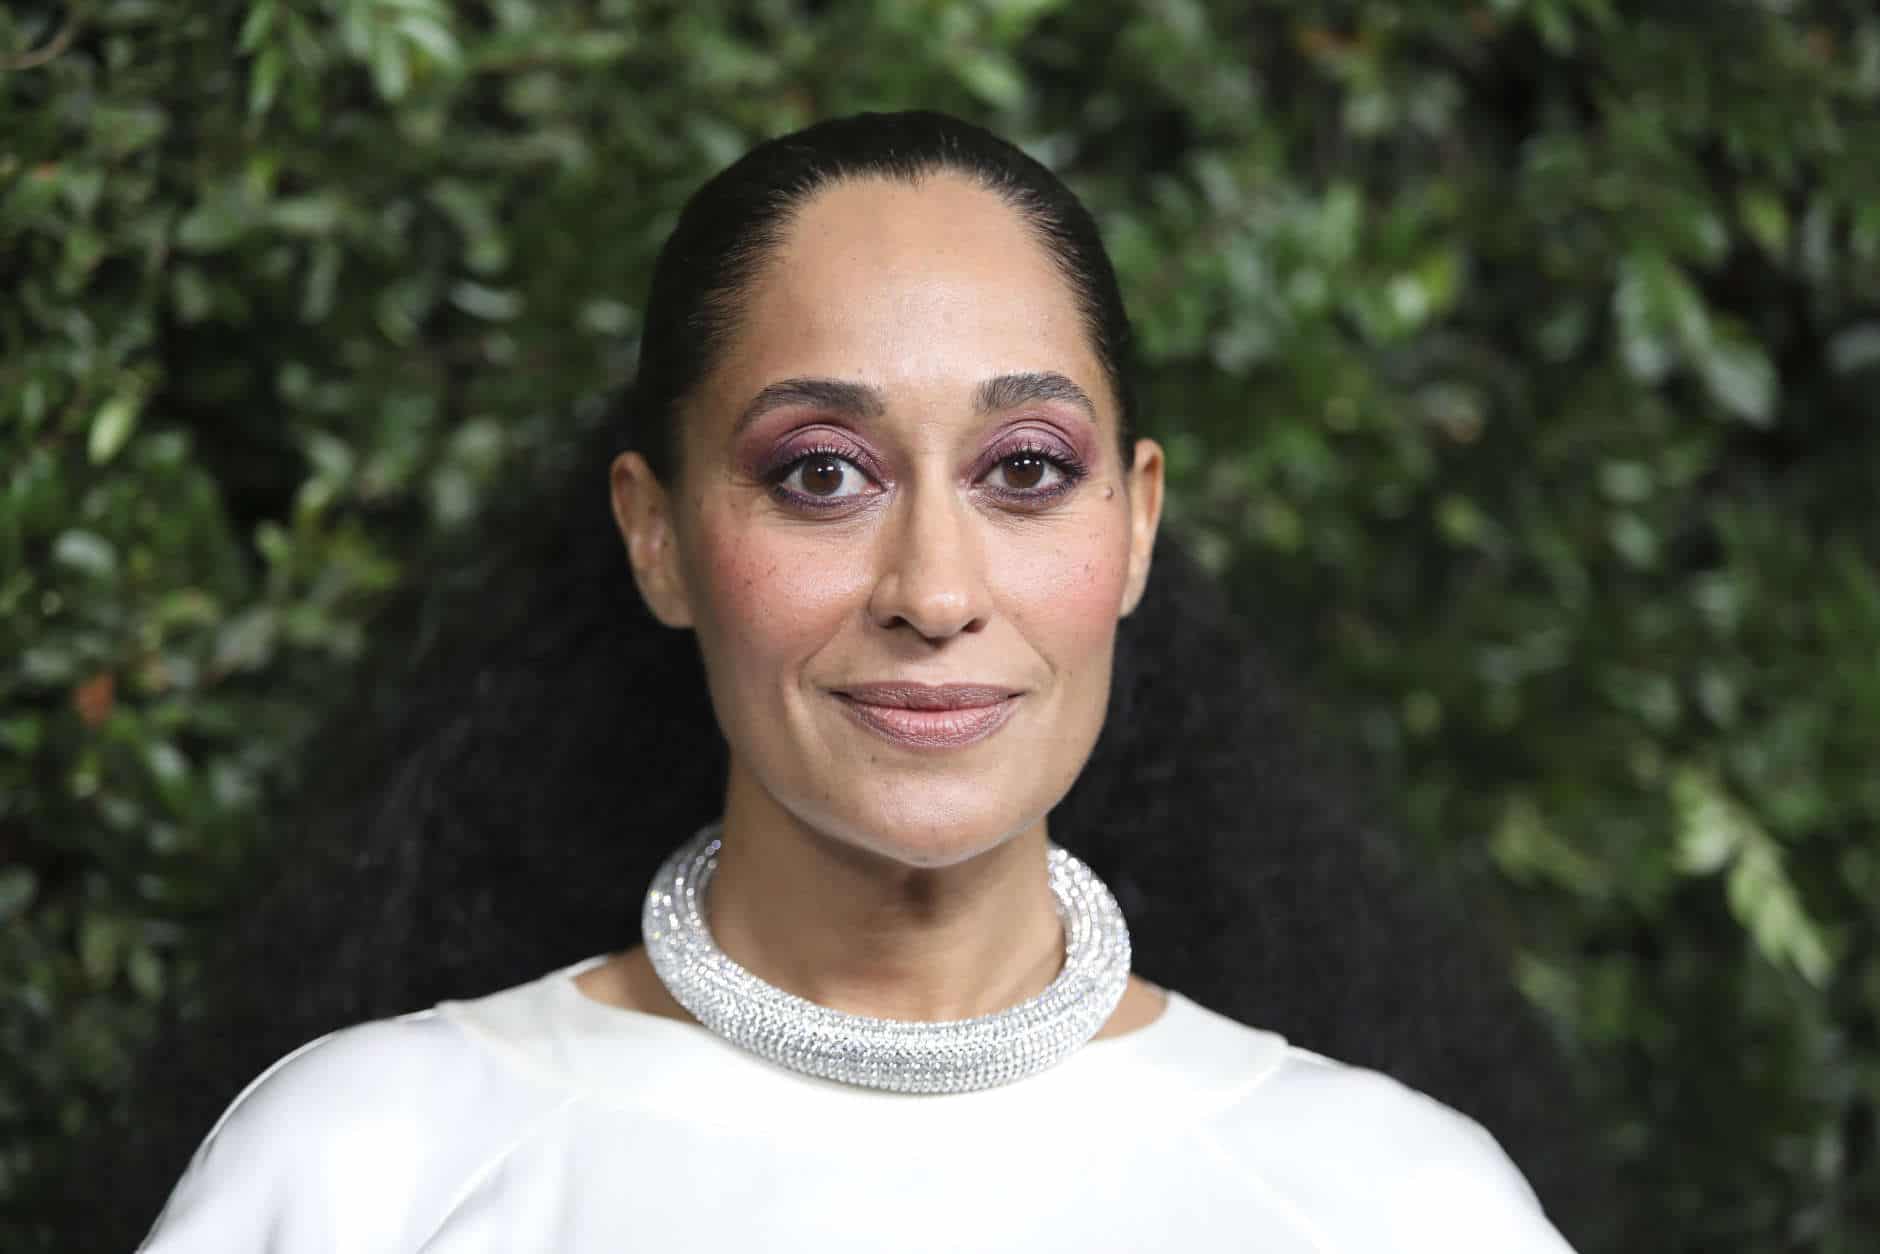 Tracee Ellis Ross arrives at the CHANEL Pre-Oscar Dinner at Madeo Restaurant on Saturday, March 3, 2018, in Los Angeles. (Photo by Omar Vega/Invision/AP)